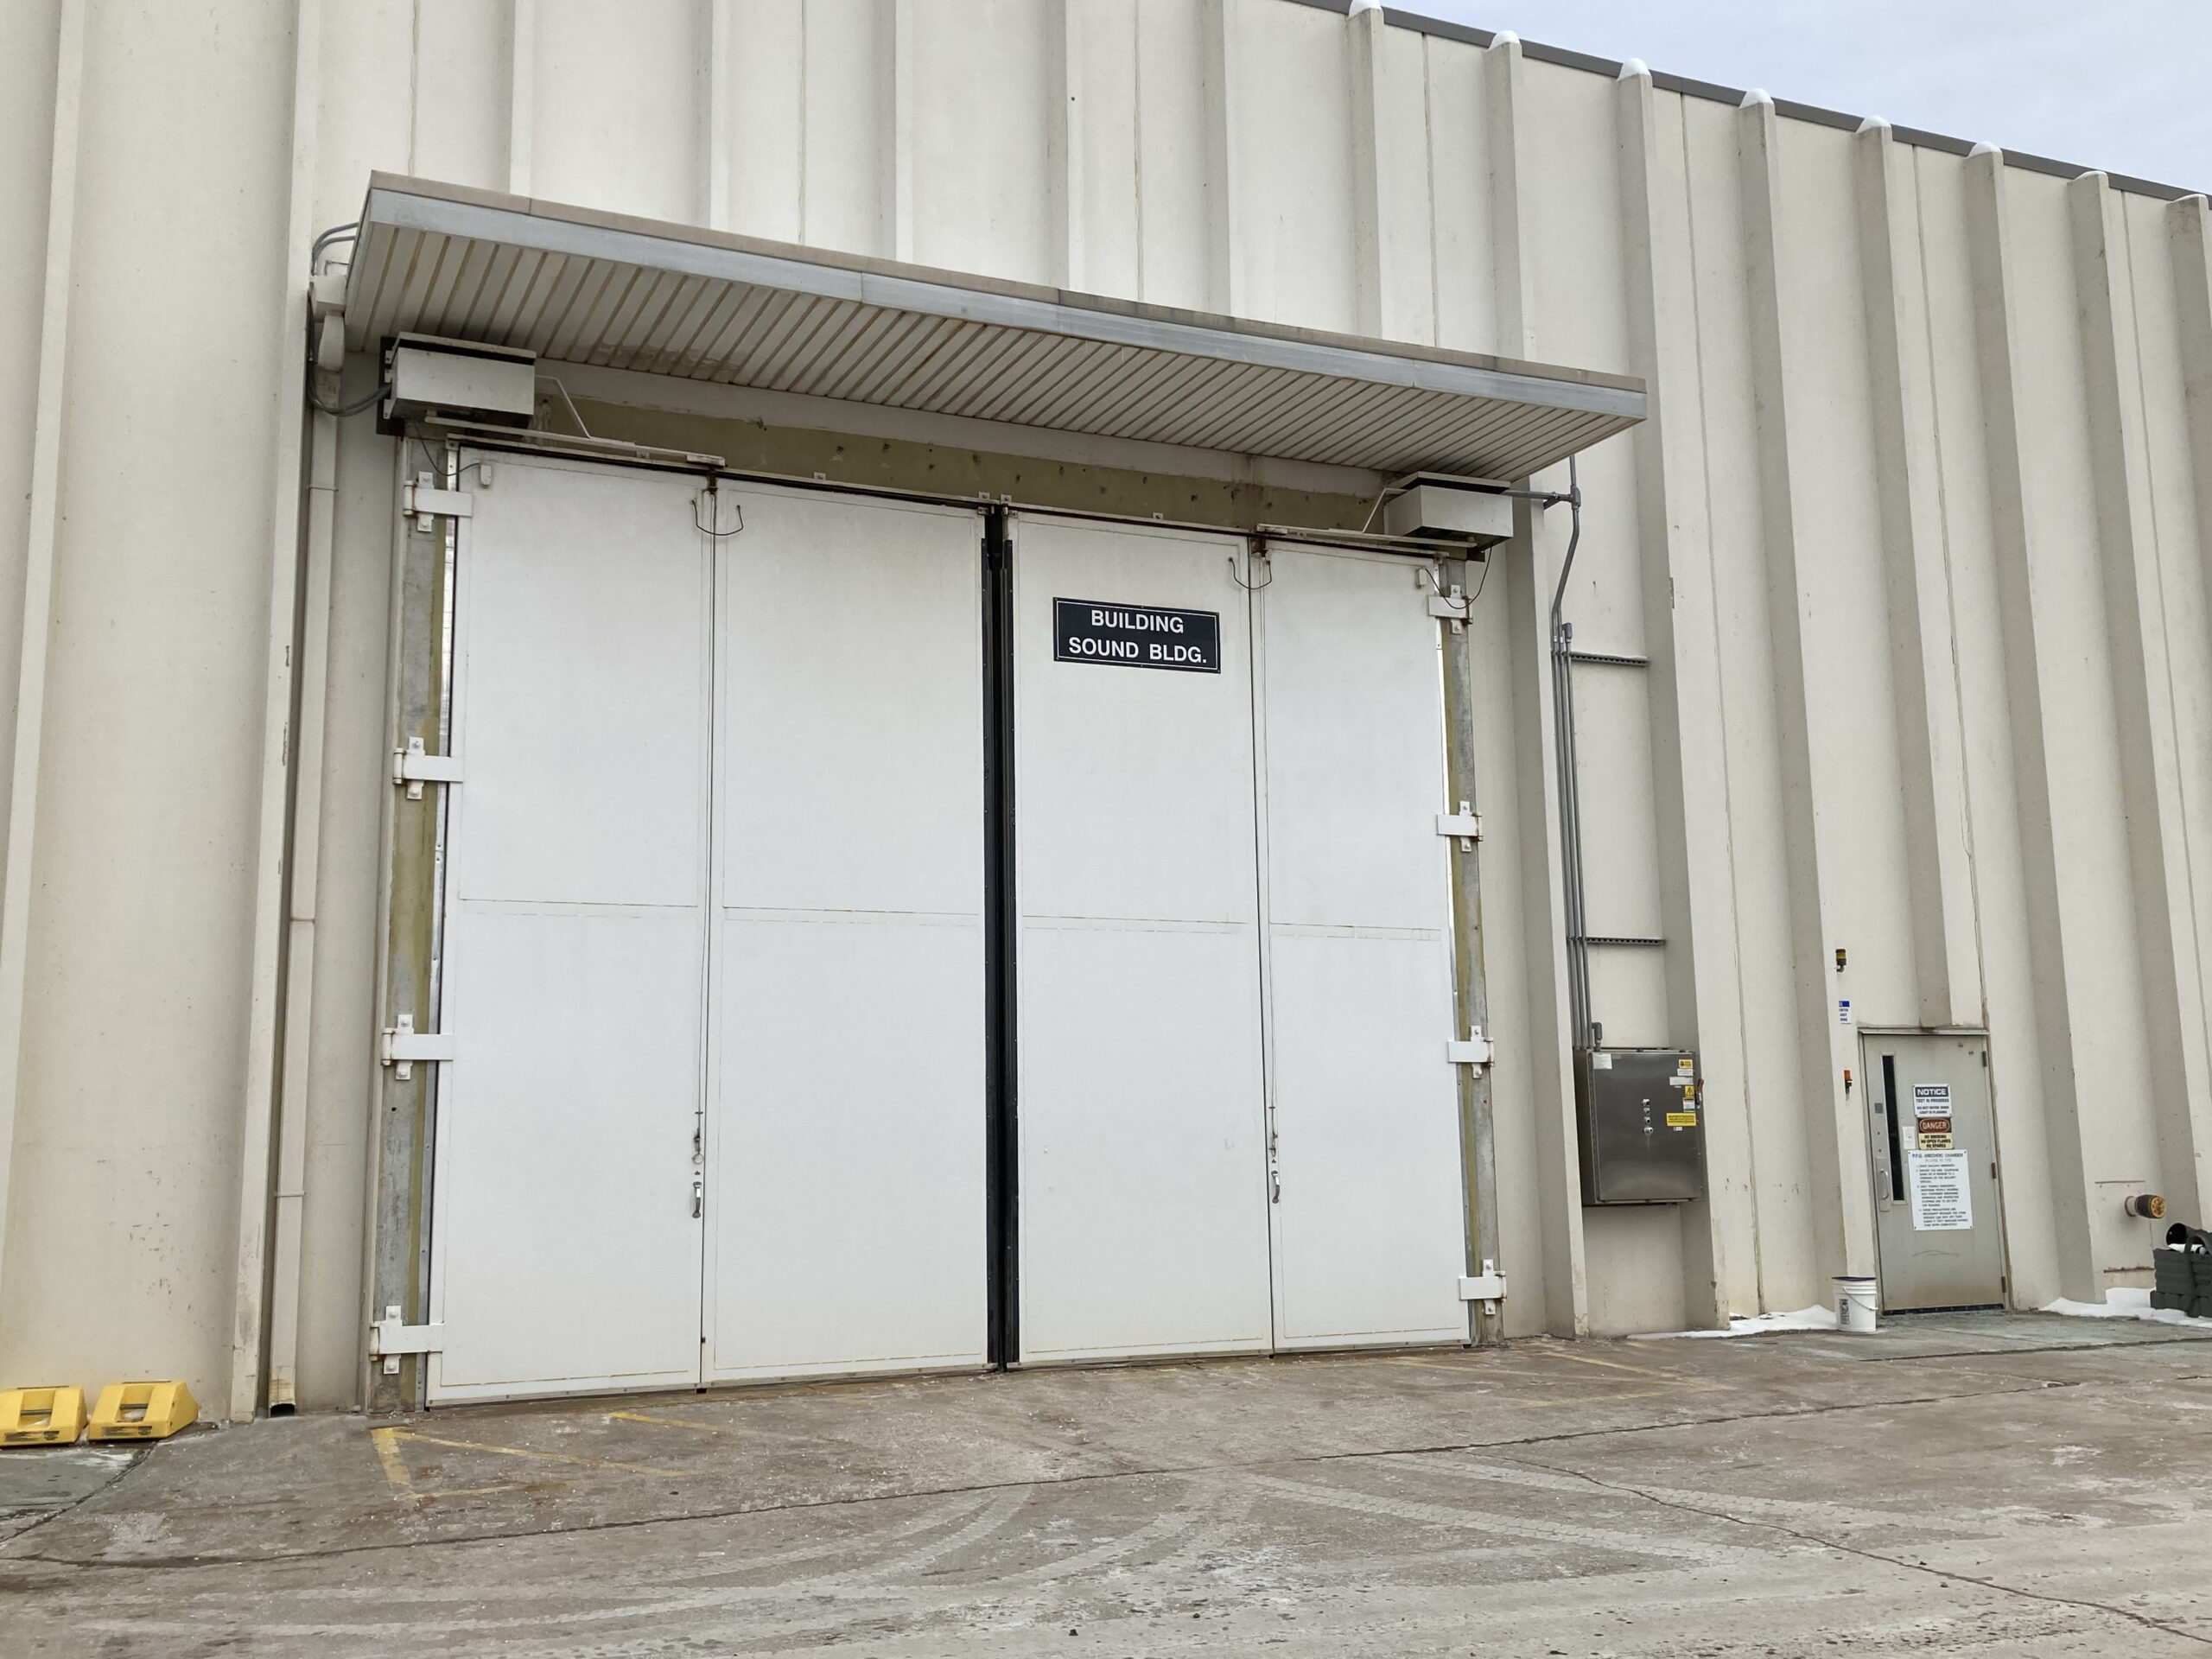 Four Fold Exterior Mounted Door, STC51 - heavy machinery testing cell